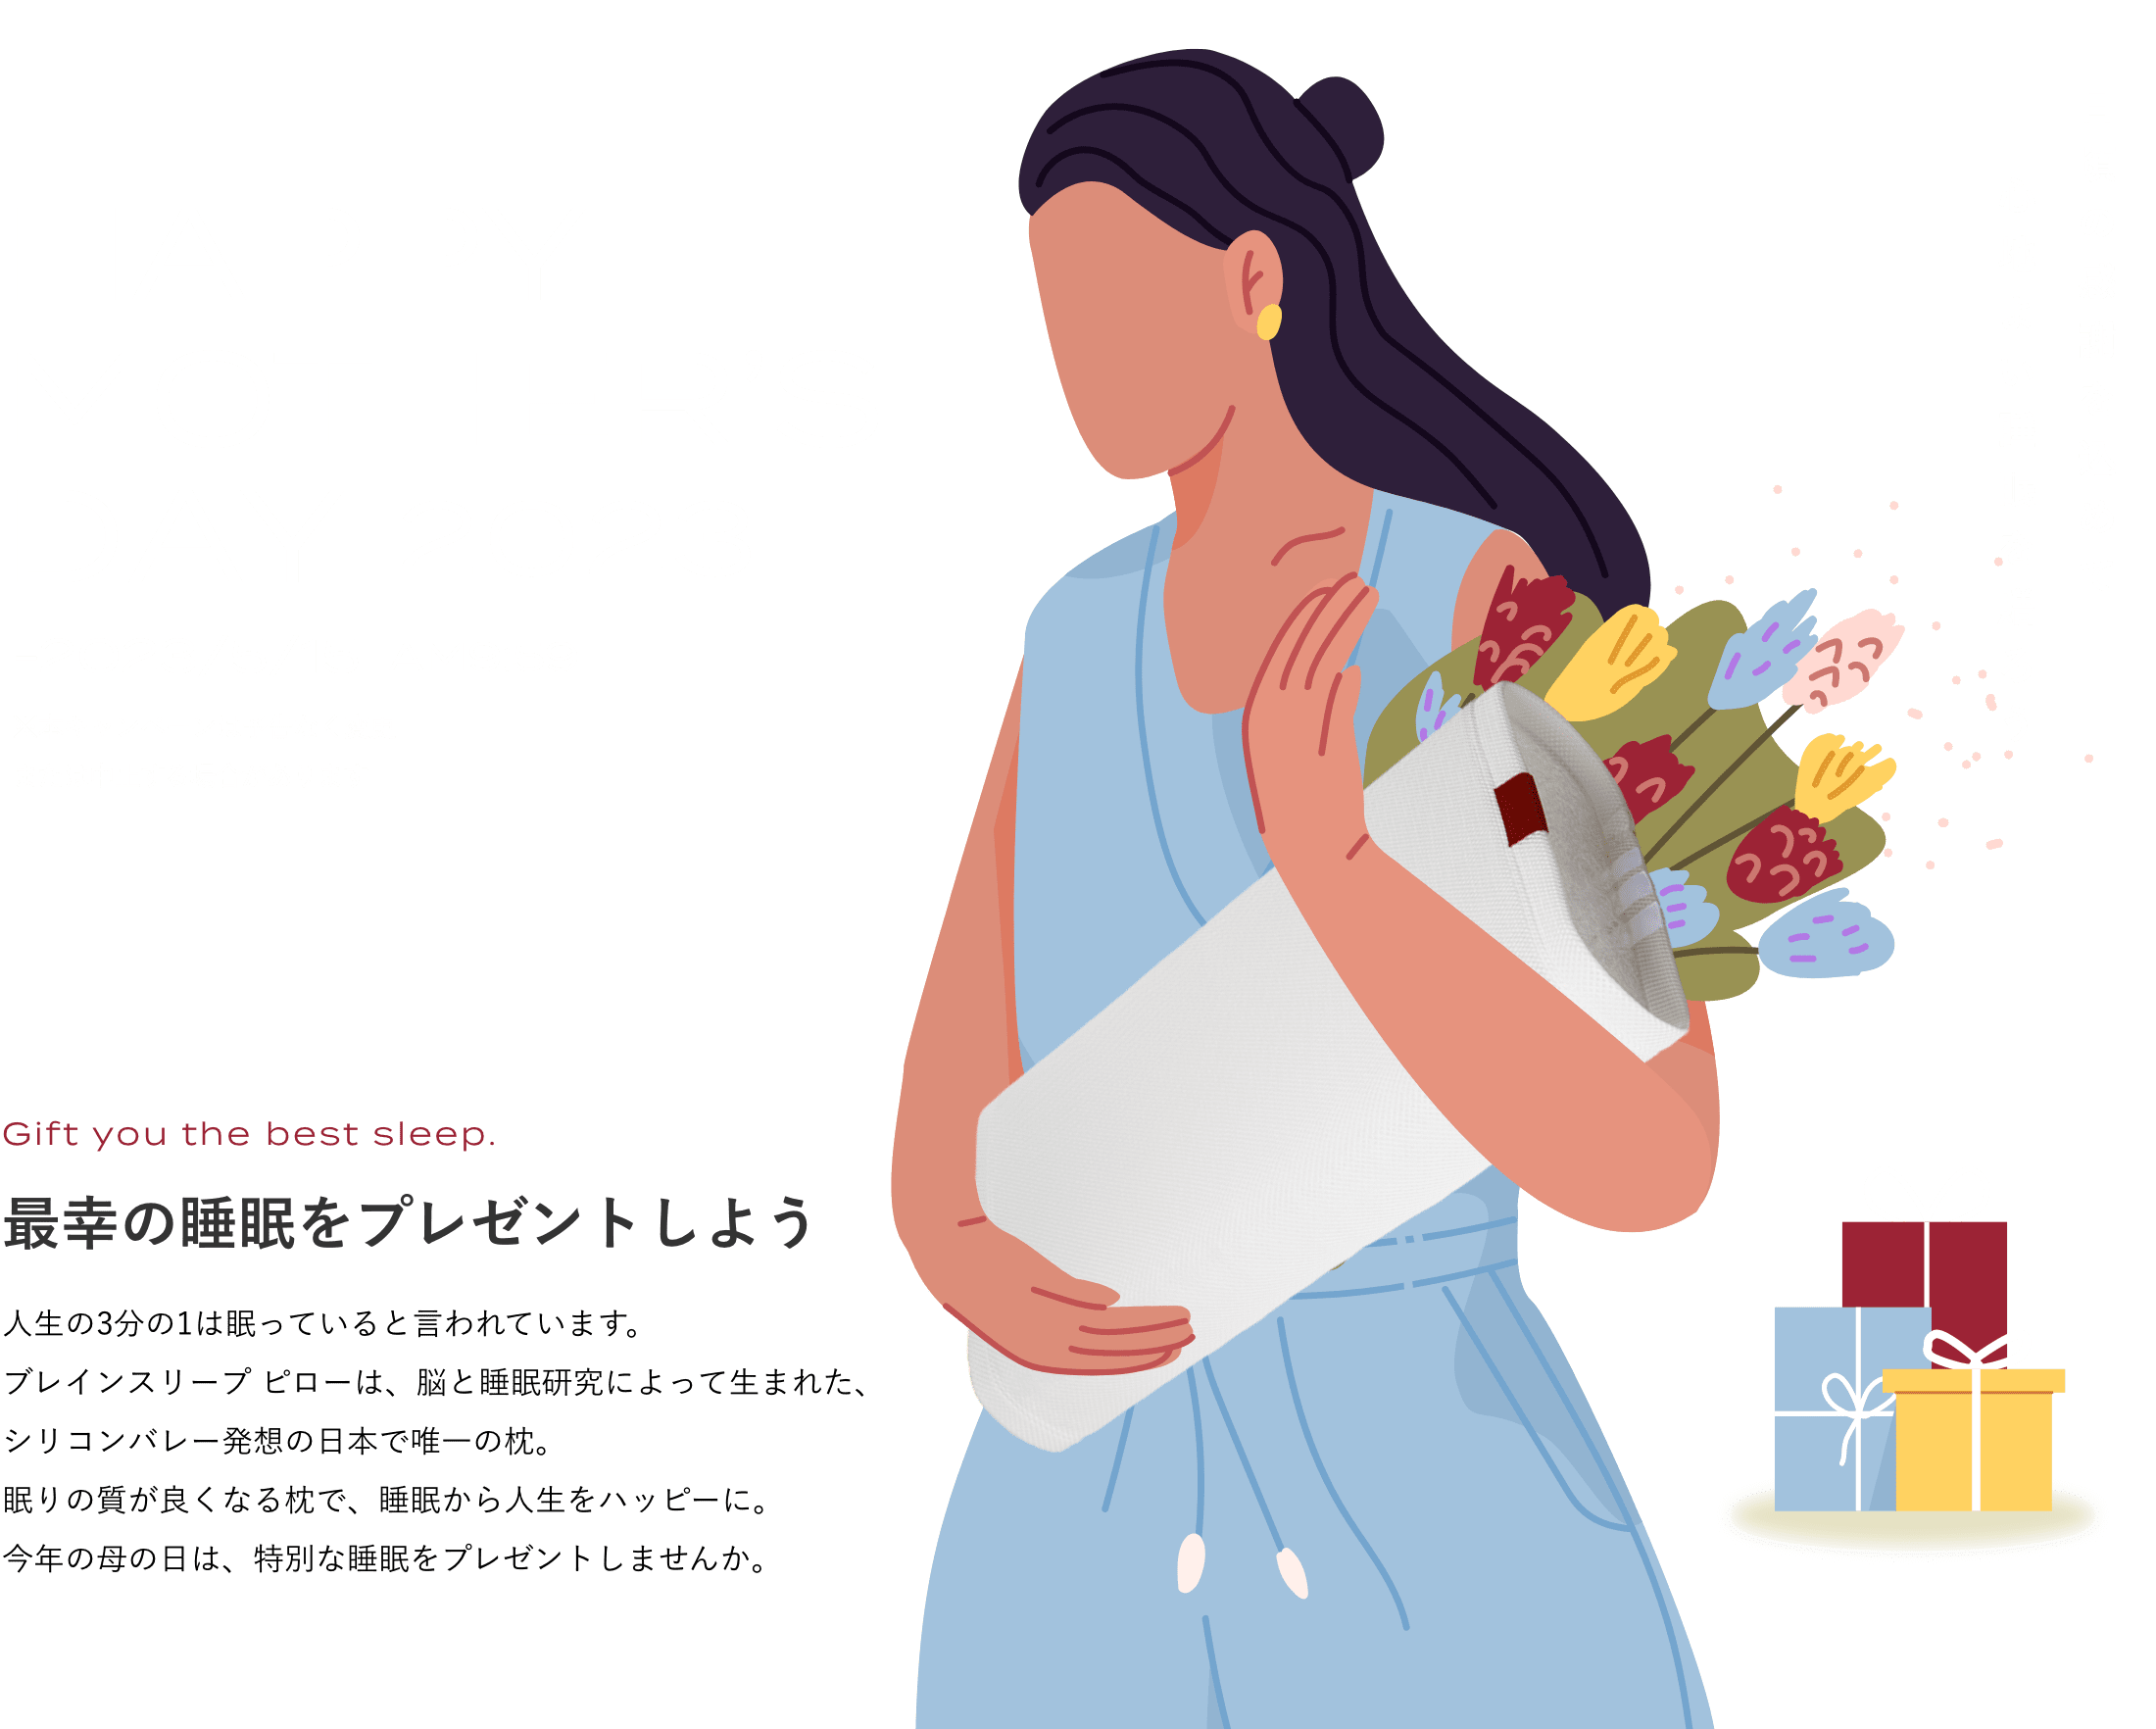 HAPPY MOTHER'S DAY 2023